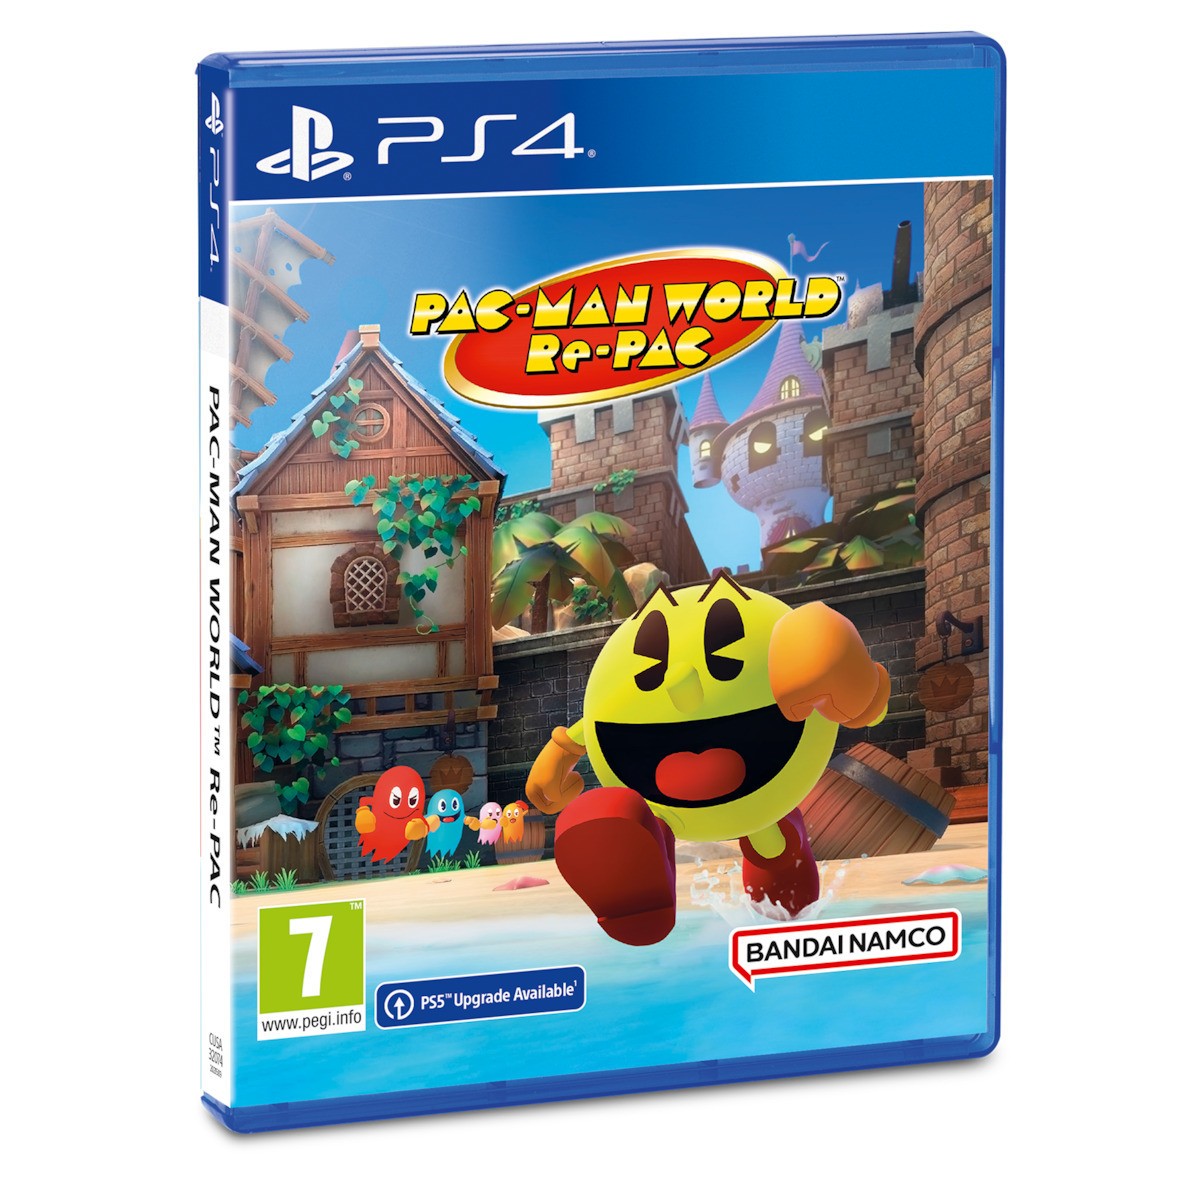 PS4 PAC-MAN WORLD RE-PAC GAME